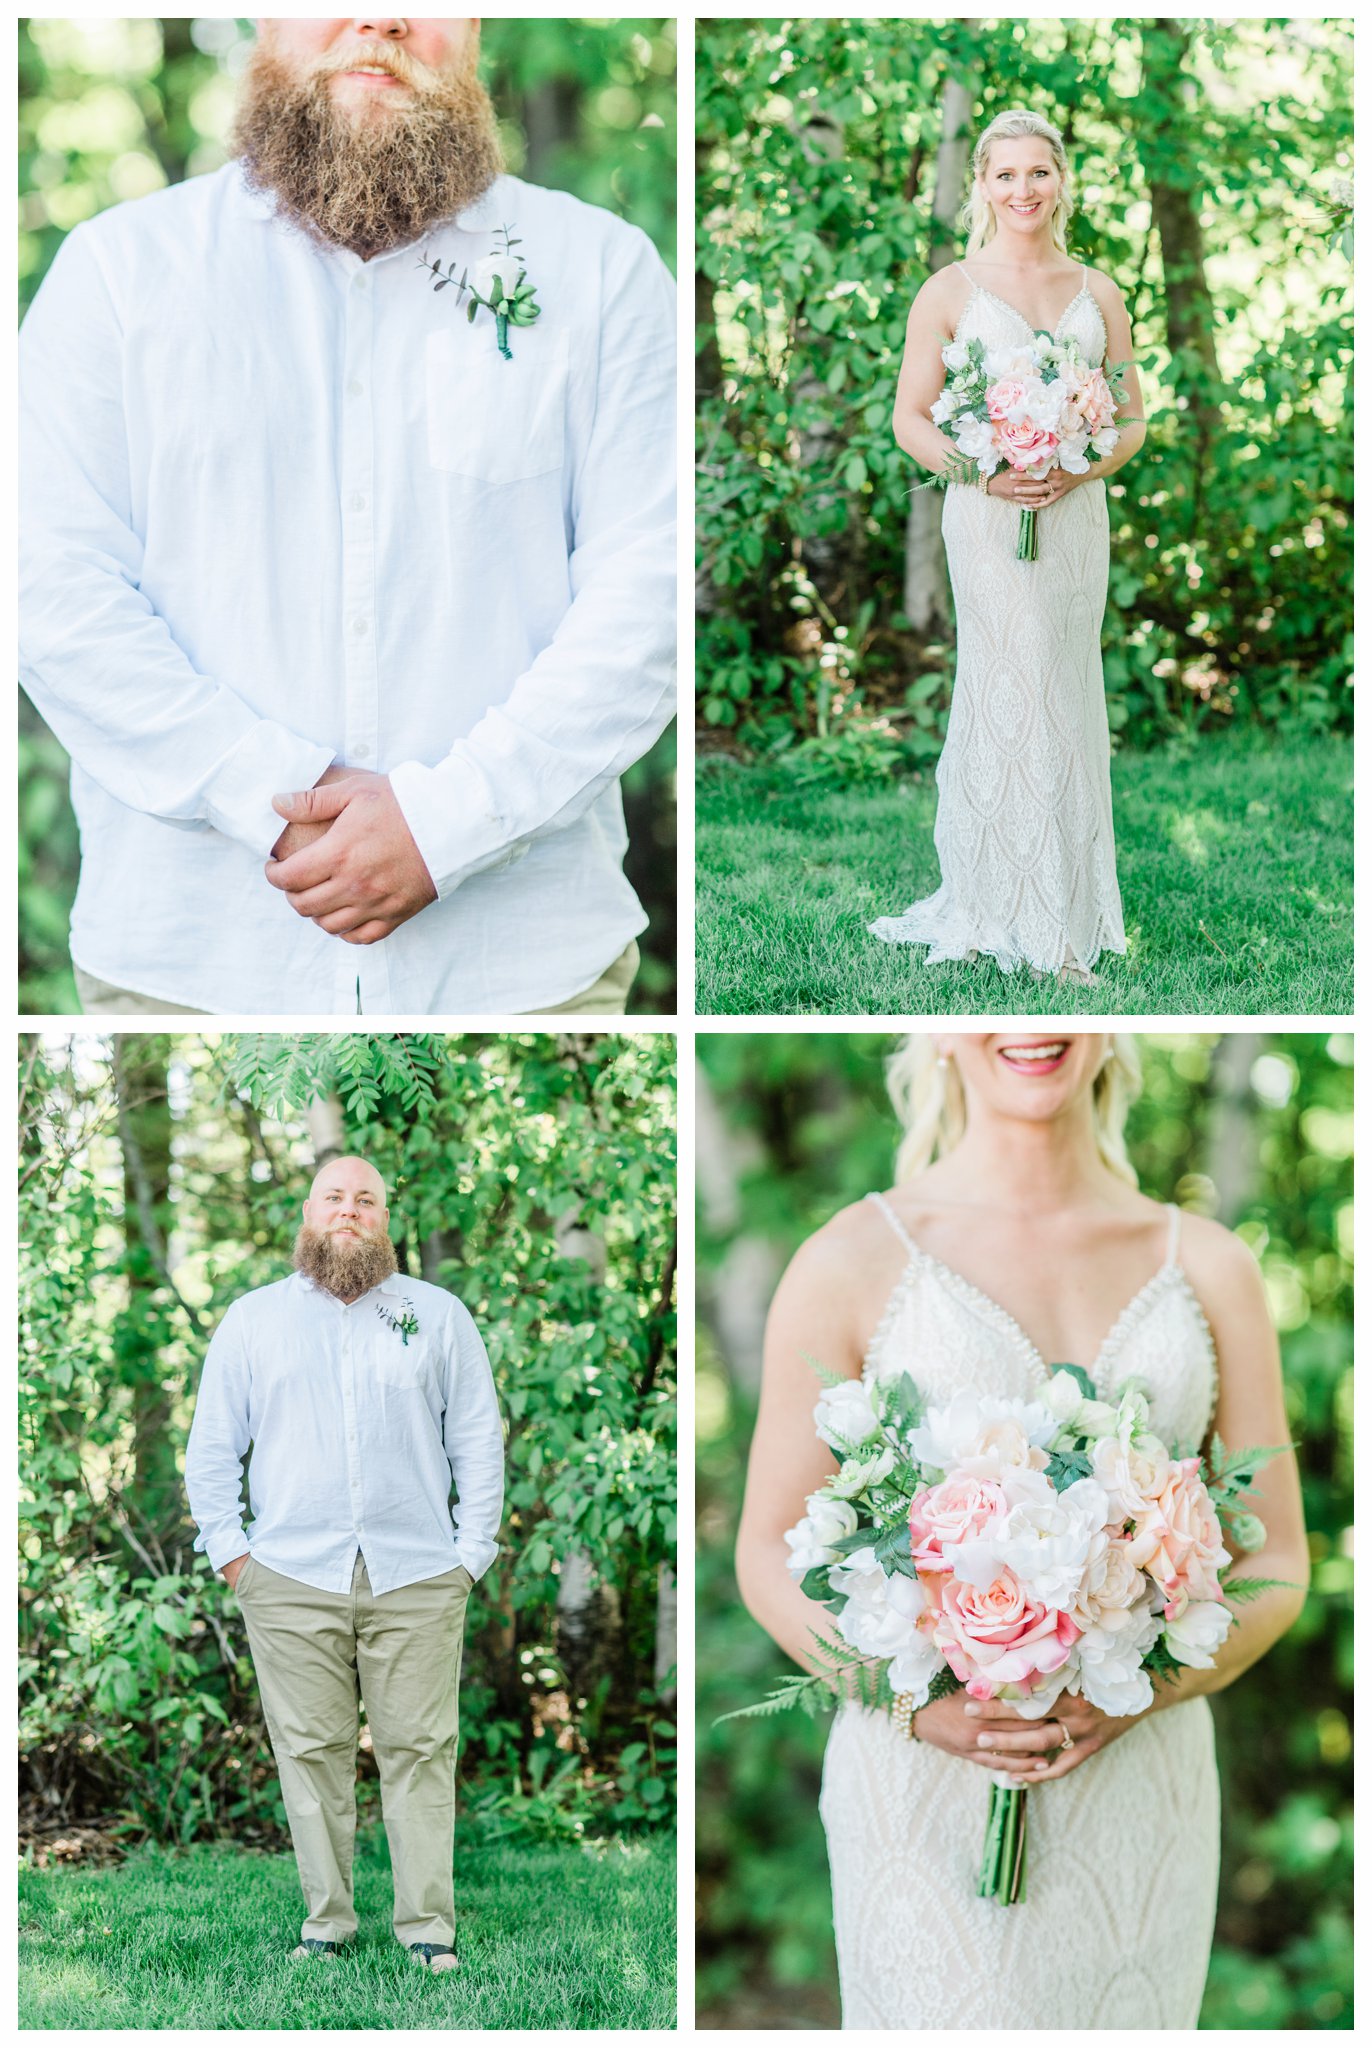 Bride and groom portraits from a summer Bluefin Bay Wedding. Photo by Kayla Lee.